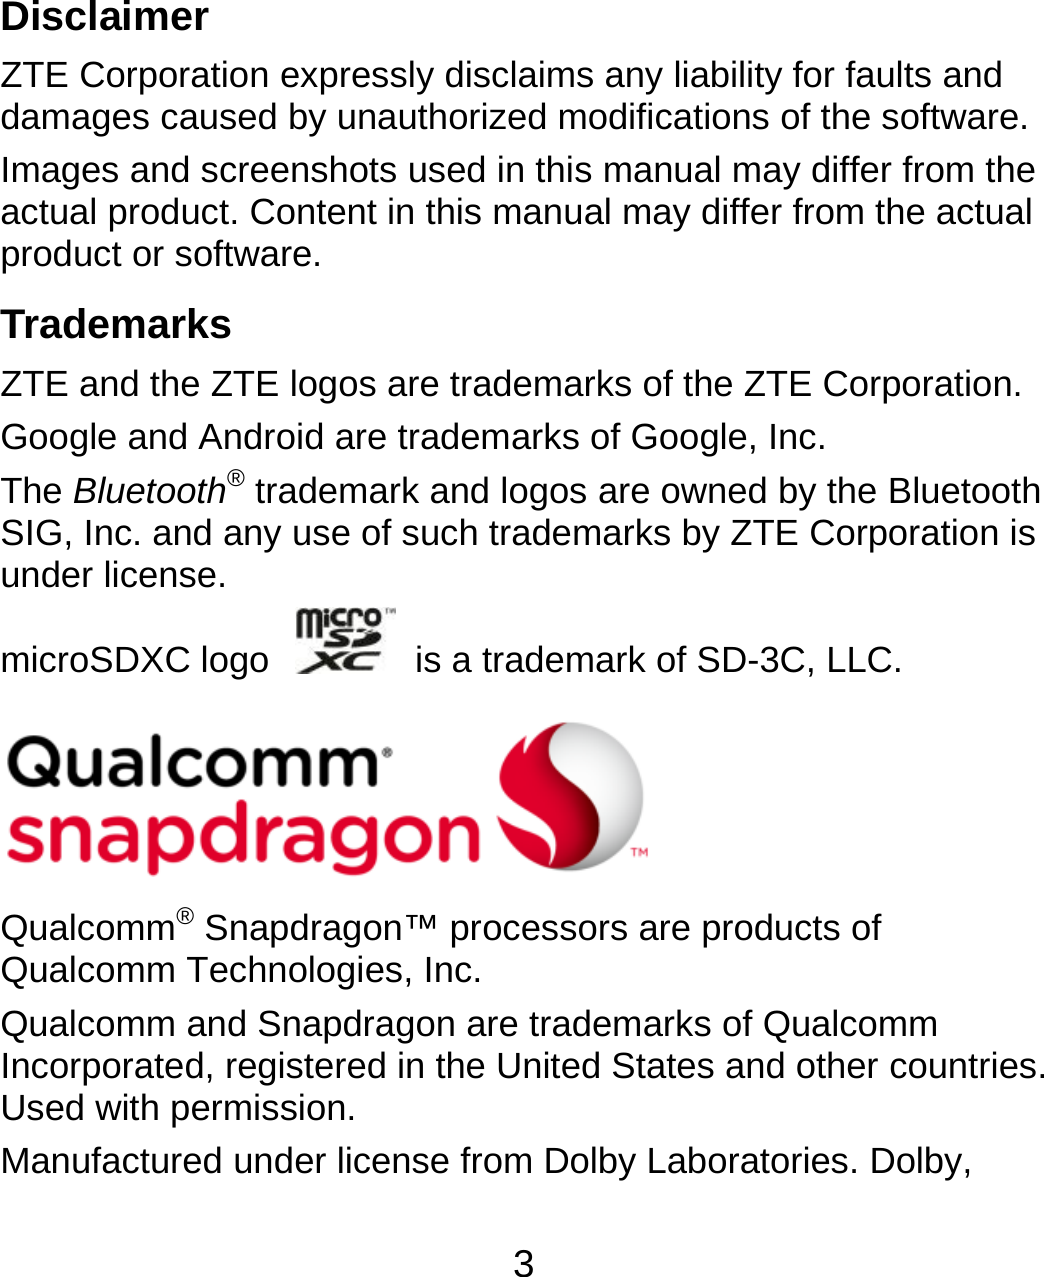  3  Disclaimer ZTE Corporation expressly disclaims any liability for faults and damages caused by unauthorized modifications of the software. Images and screenshots used in this manual may differ from the actual product. Content in this manual may differ from the actual product or software. Trademarks ZTE and the ZTE logos are trademarks of the ZTE Corporation. Google and Android are trademarks of Google, Inc. The Bluetooth® trademark and logos are owned by the Bluetooth SIG, Inc. and any use of such trademarks by ZTE Corporation is under license. microSDXC logo    is a trademark of SD-3C, LLC.       Qualcomm® Snapdragon™ processors are products of Qualcomm Technologies, Inc.   Qualcomm and Snapdragon are trademarks of Qualcomm Incorporated, registered in the United States and other countries. Used with permission. Manufactured under license from Dolby Laboratories. Dolby, 